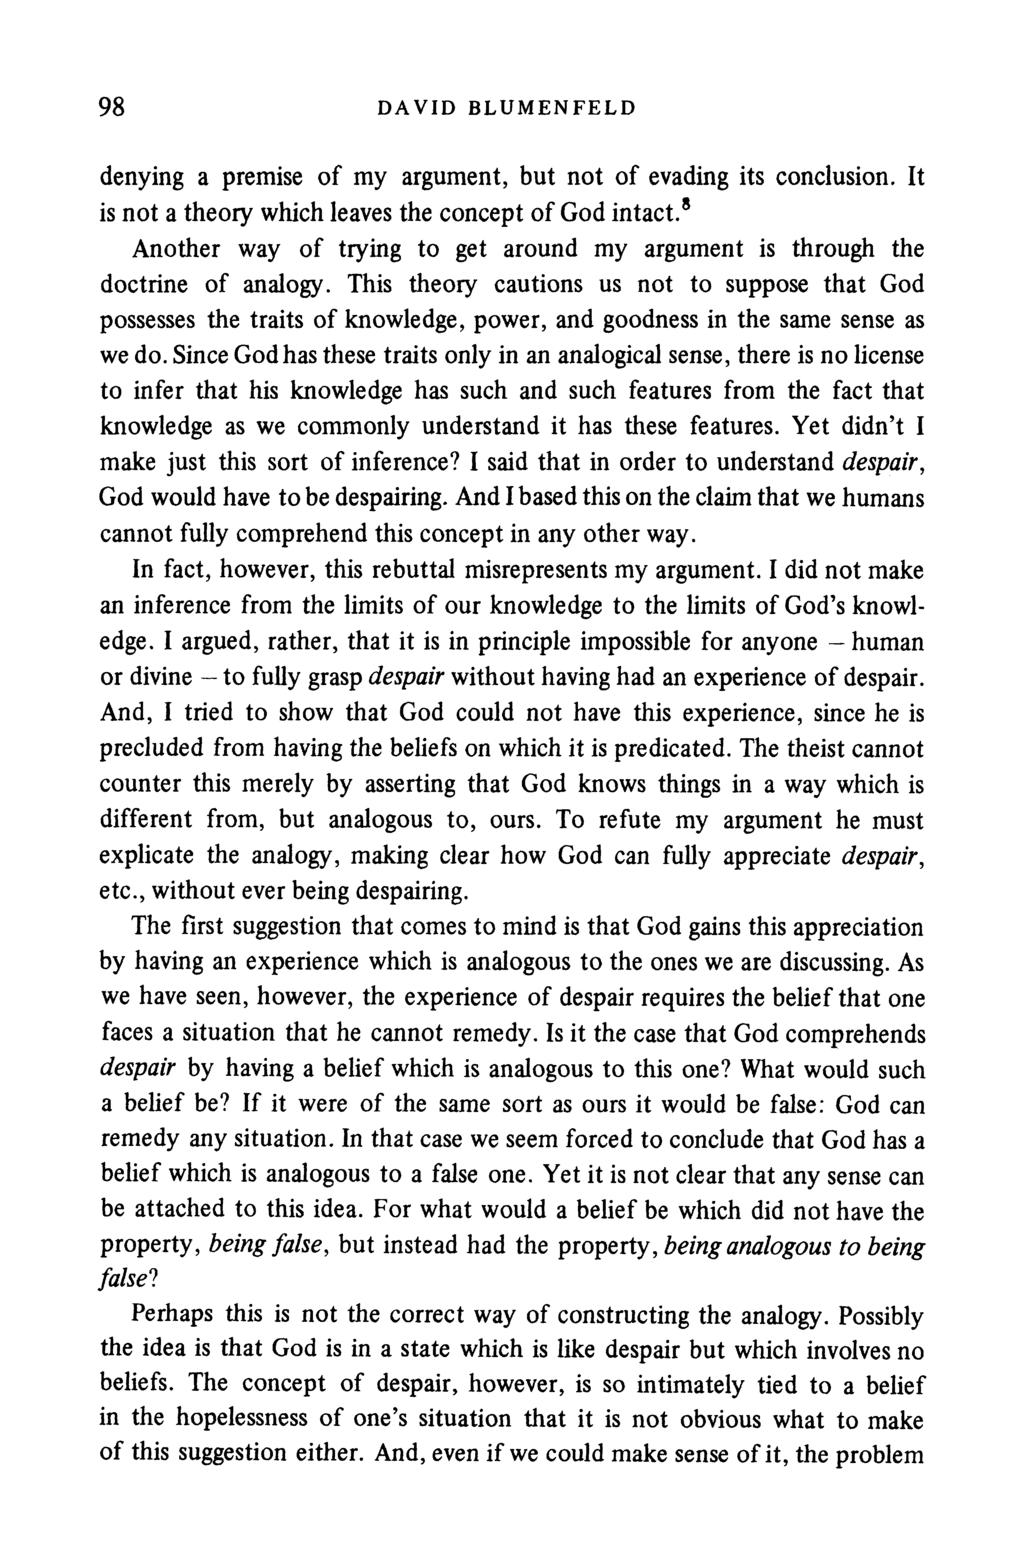 98 DAVID BLUMENFELD denying a premise of my argument, but not of evading its conclusion. It is not a theory which leaves the concept of God intact.